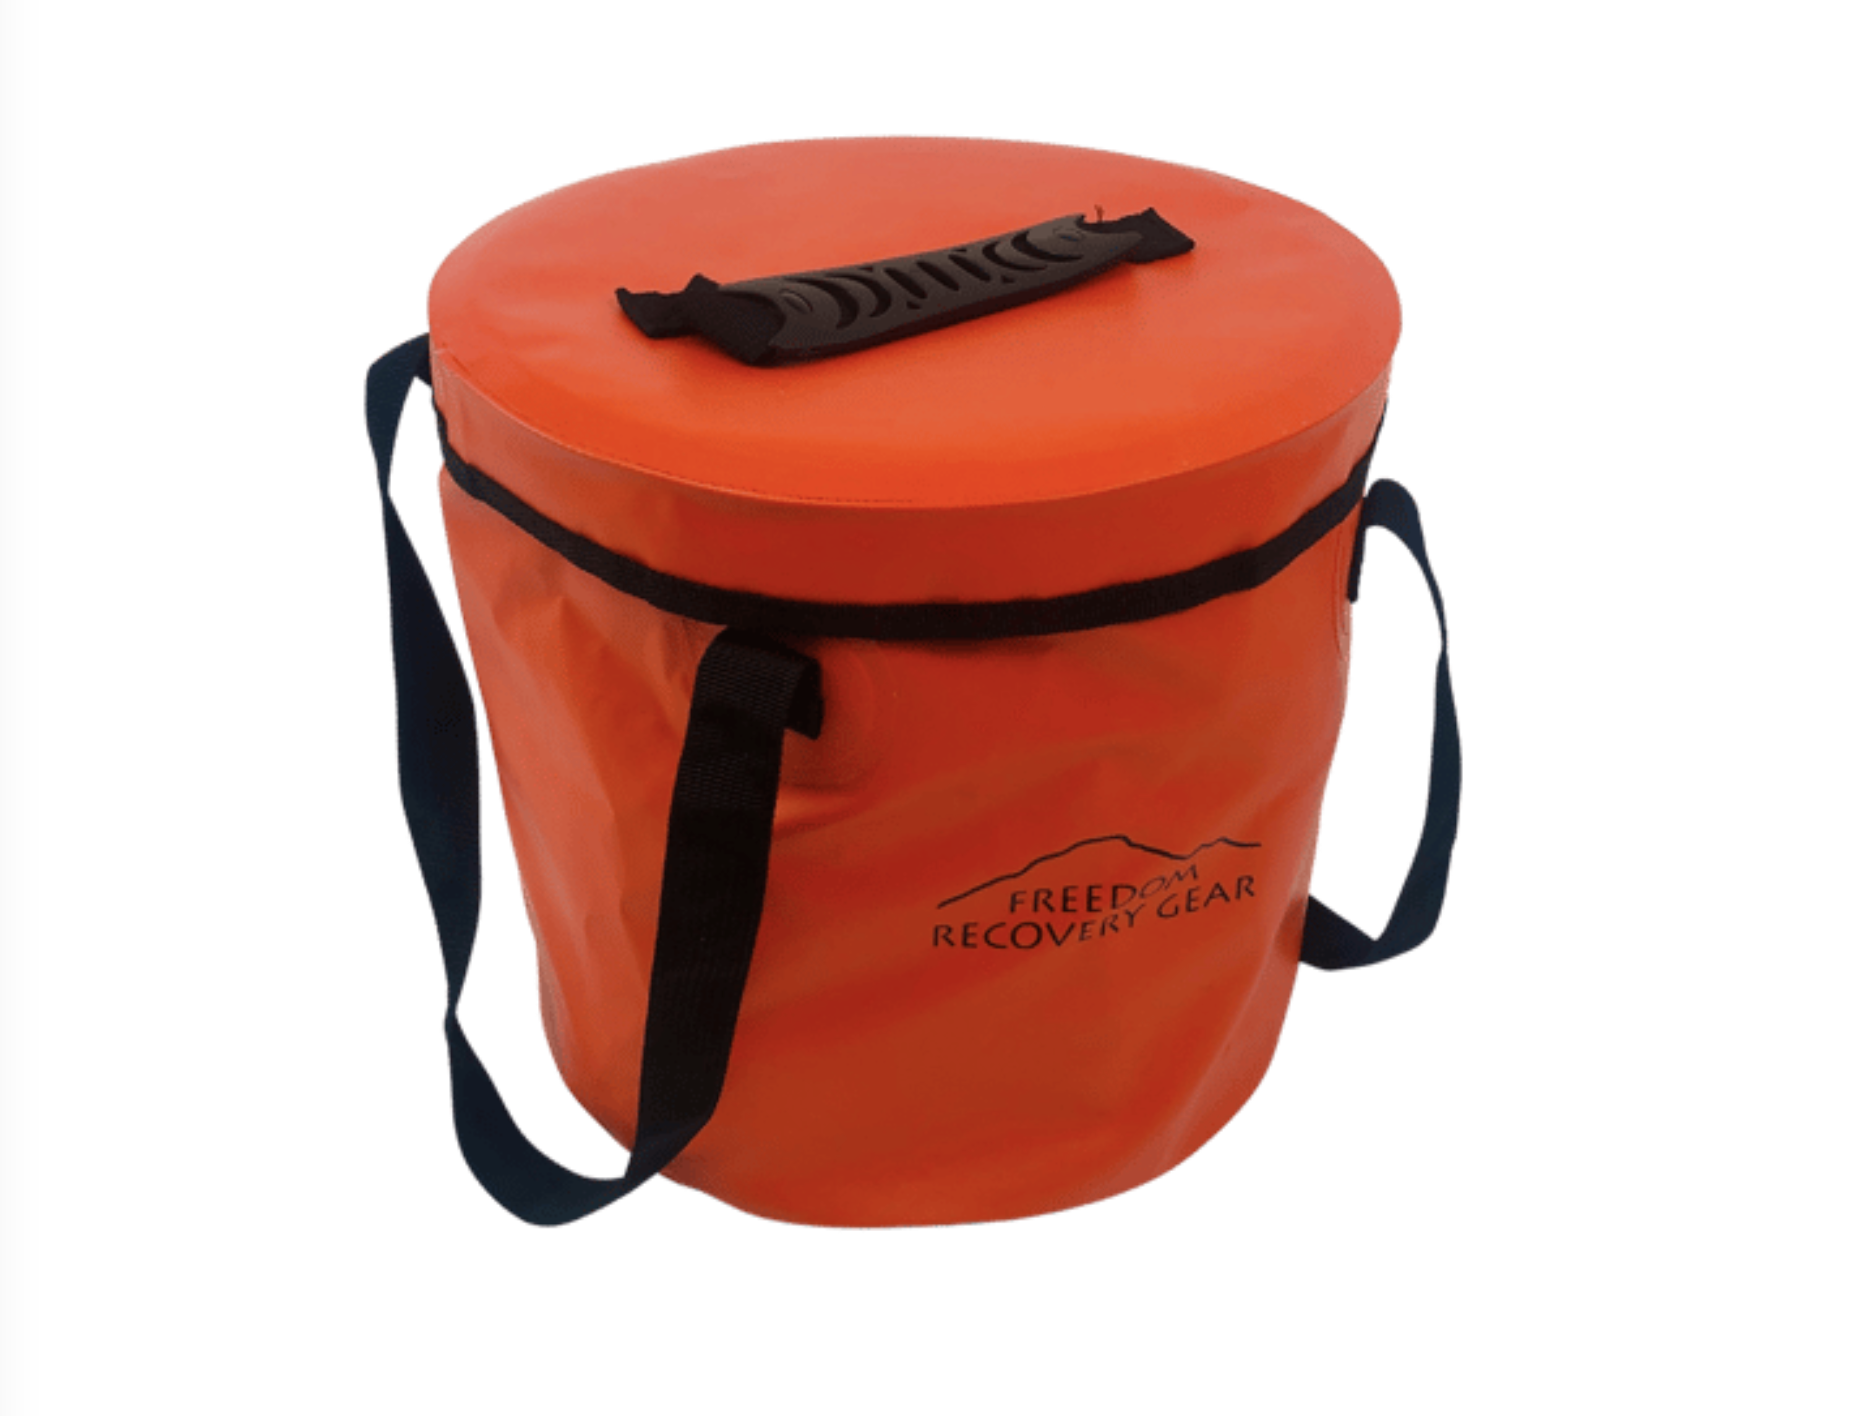 Freedom Recovery Gear - Bucket, Colapsable Water / Rope Bucket 12L - Firebucket Red - 719710720916